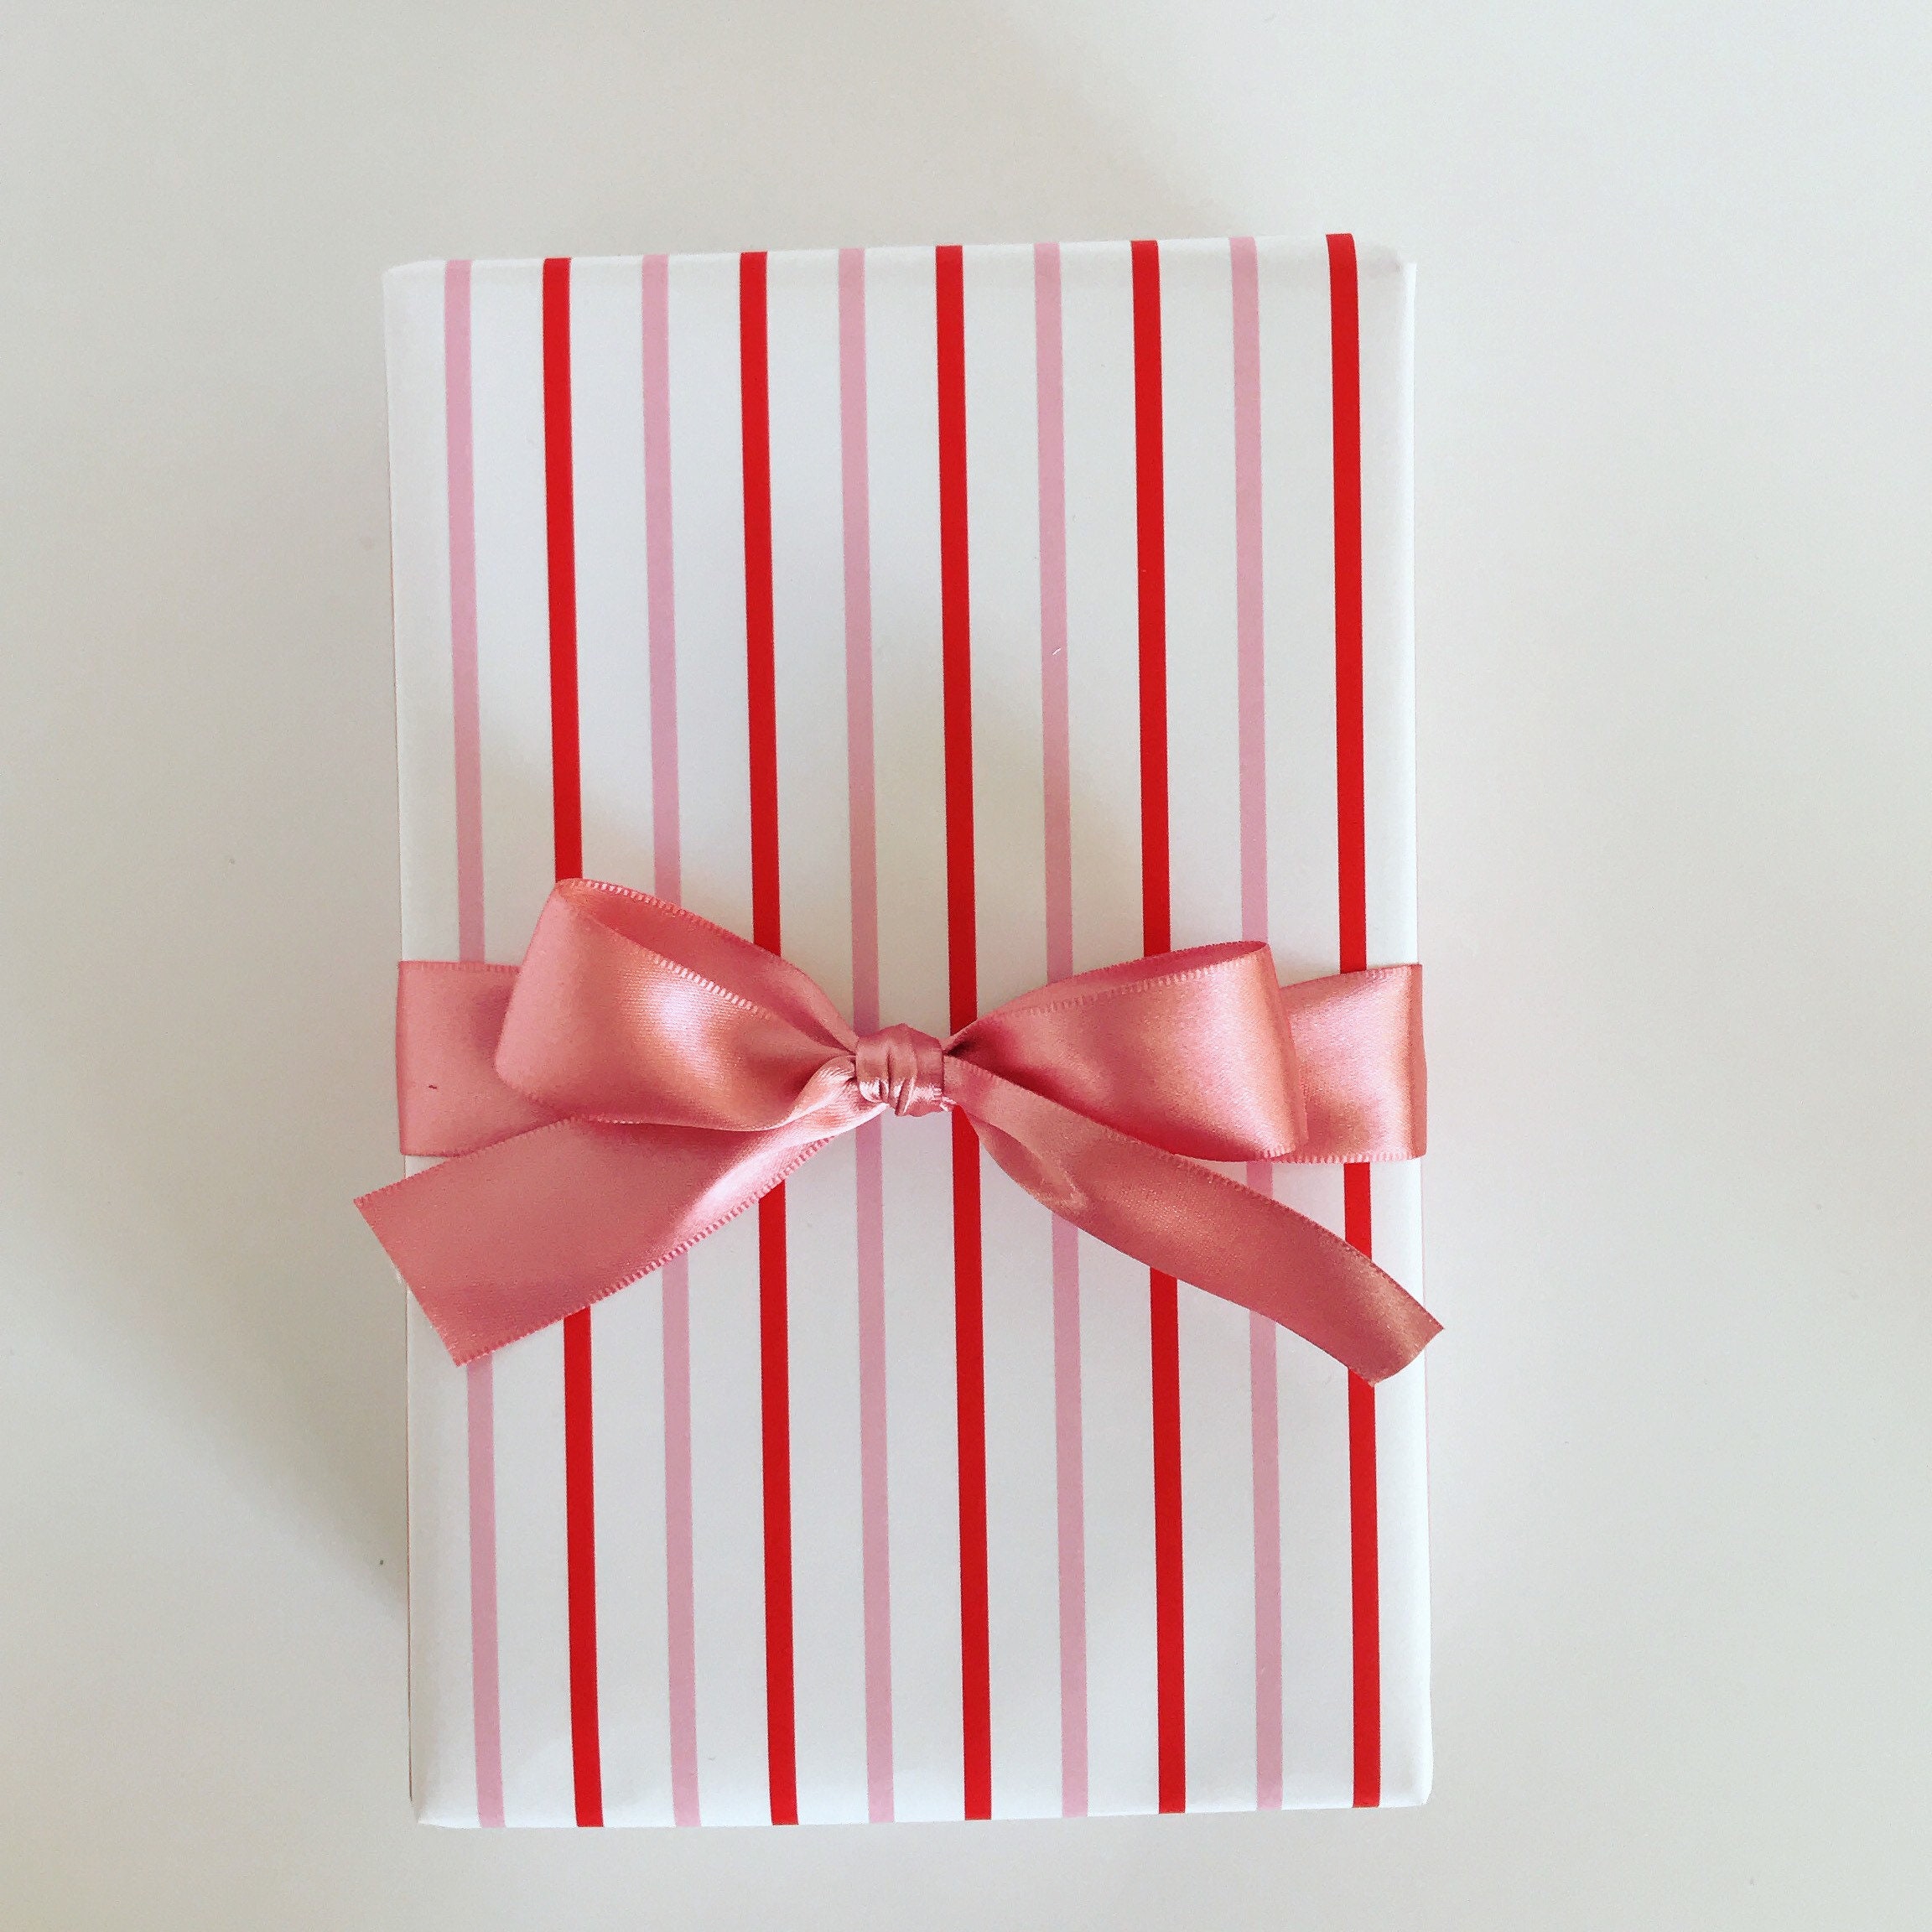 Old Fashioned Retro Christmas Stripe Pattern Pink Wrapping Paper Sheets